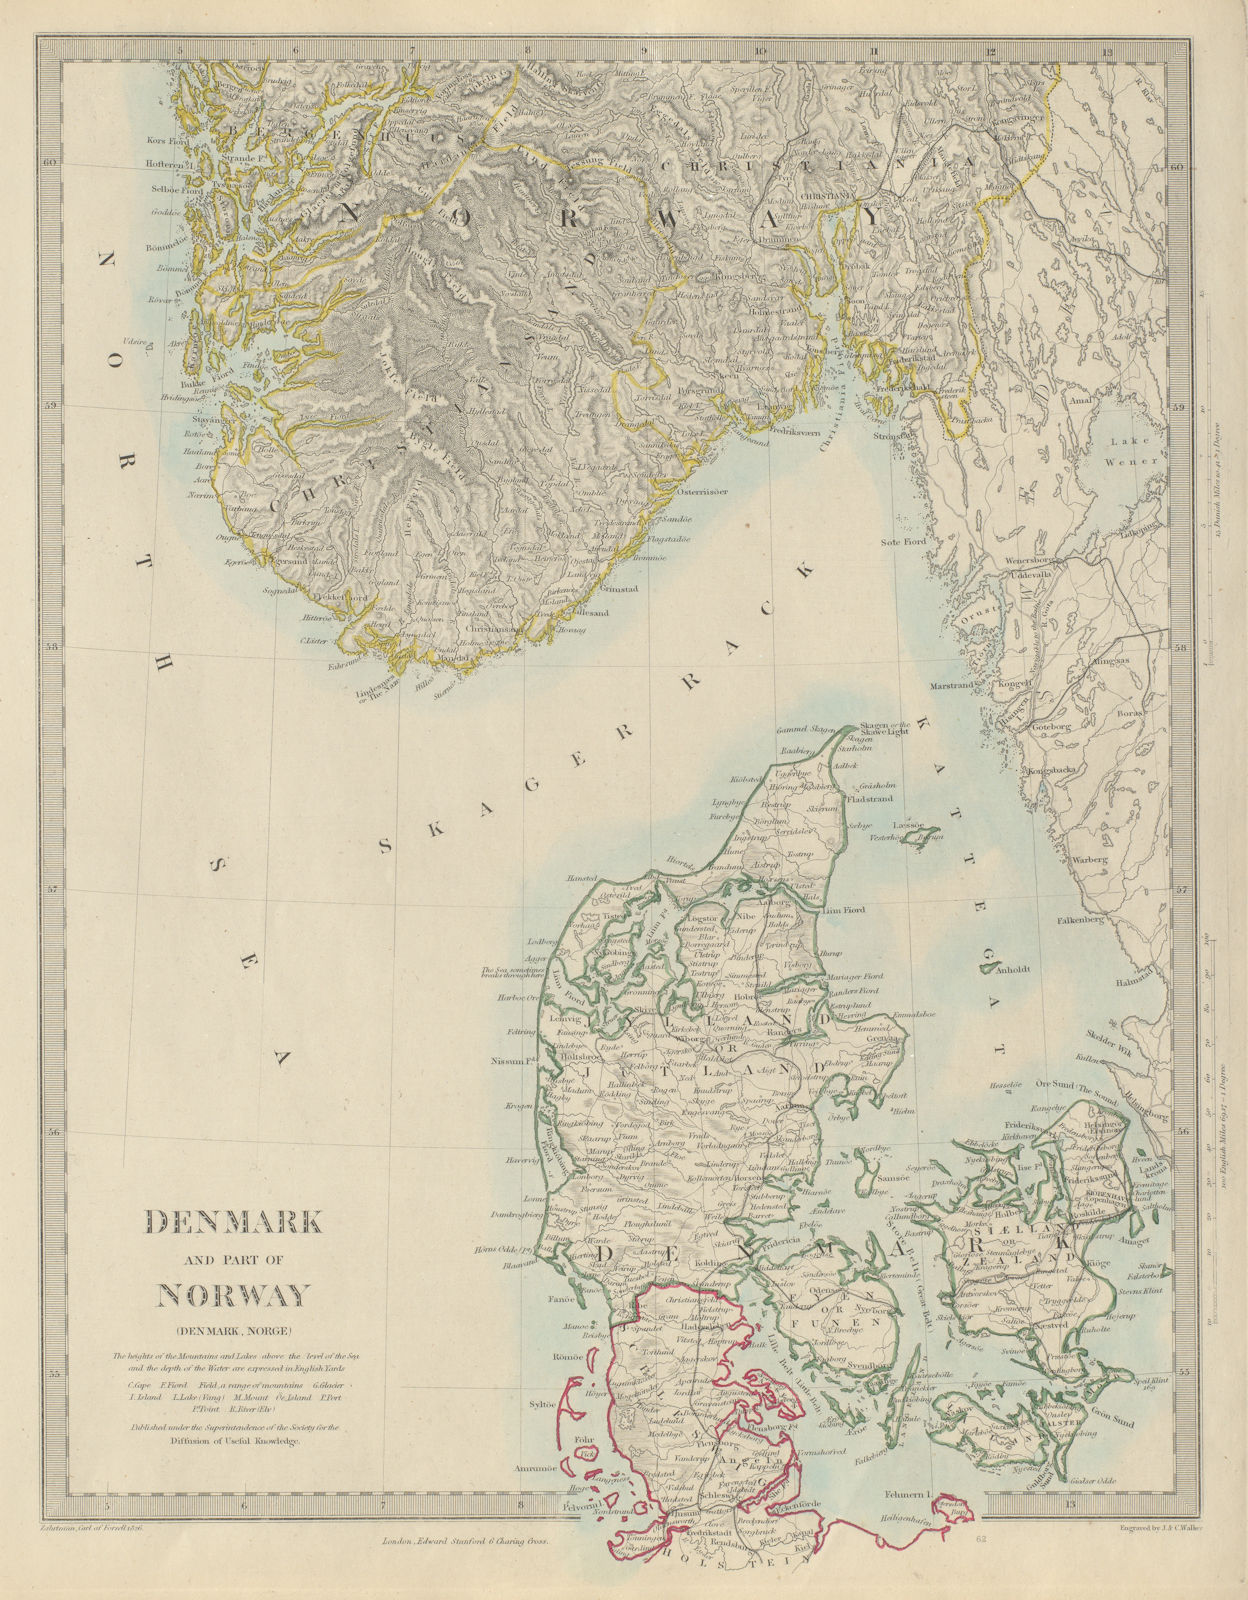 Associate Product SCANDINAVIA. Denmark, Schleswig & Southern Norway (Norge). SDUK 1874 old map